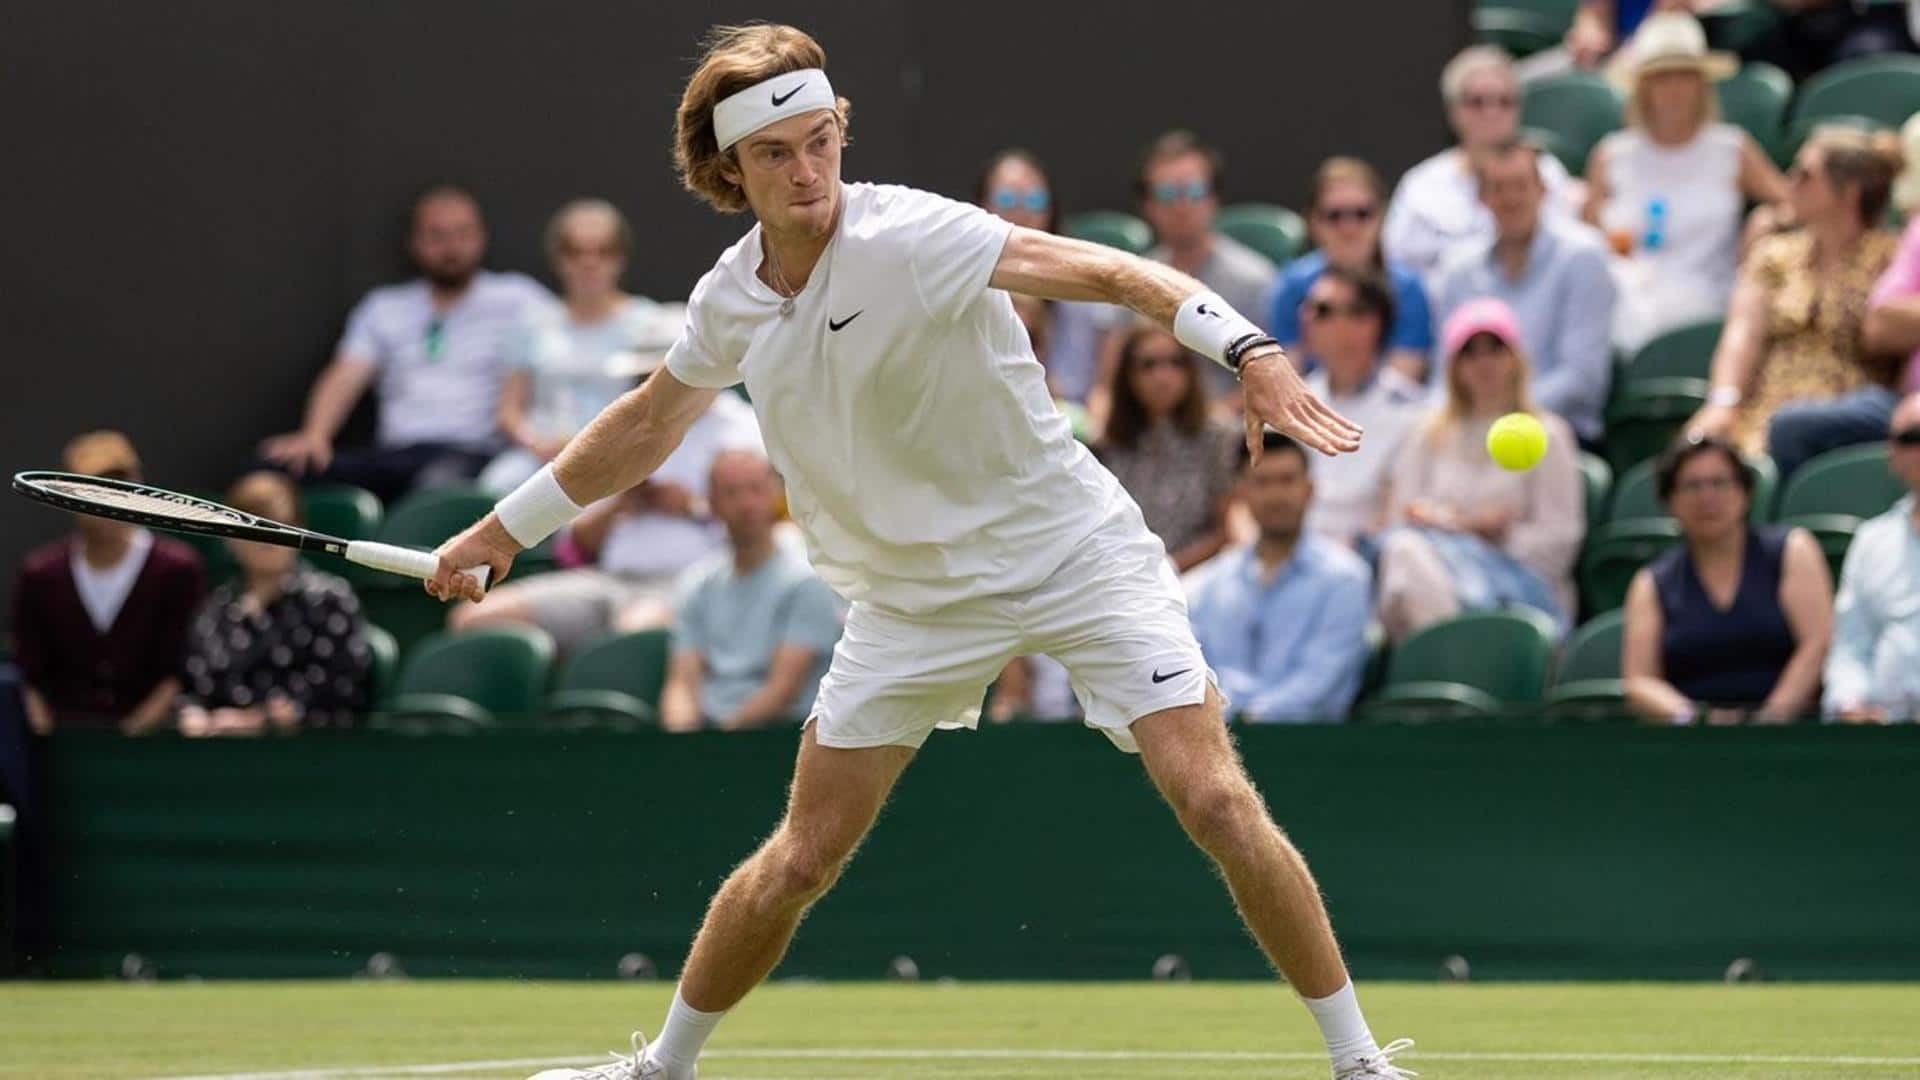 2023 Wimbledon: Andrey Rublev beats Purcell to reach second round 